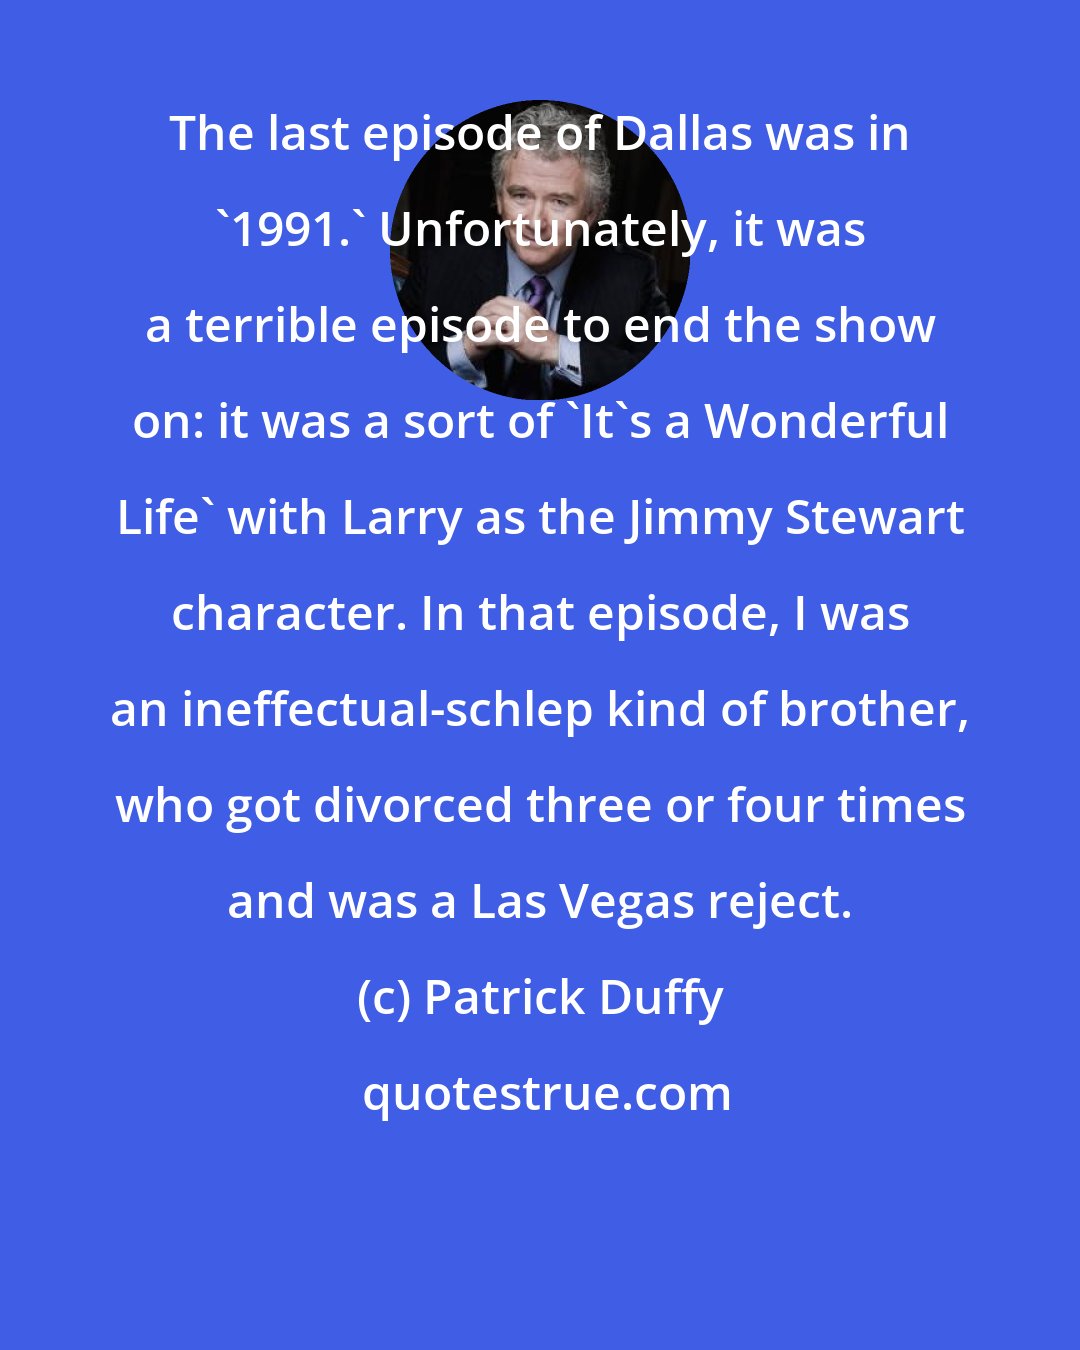 Patrick Duffy: The last episode of Dallas was in '1991.' Unfortunately, it was a terrible episode to end the show on: it was a sort of 'It's a Wonderful Life' with Larry as the Jimmy Stewart character. In that episode, I was an ineffectual-schlep kind of brother, who got divorced three or four times and was a Las Vegas reject.